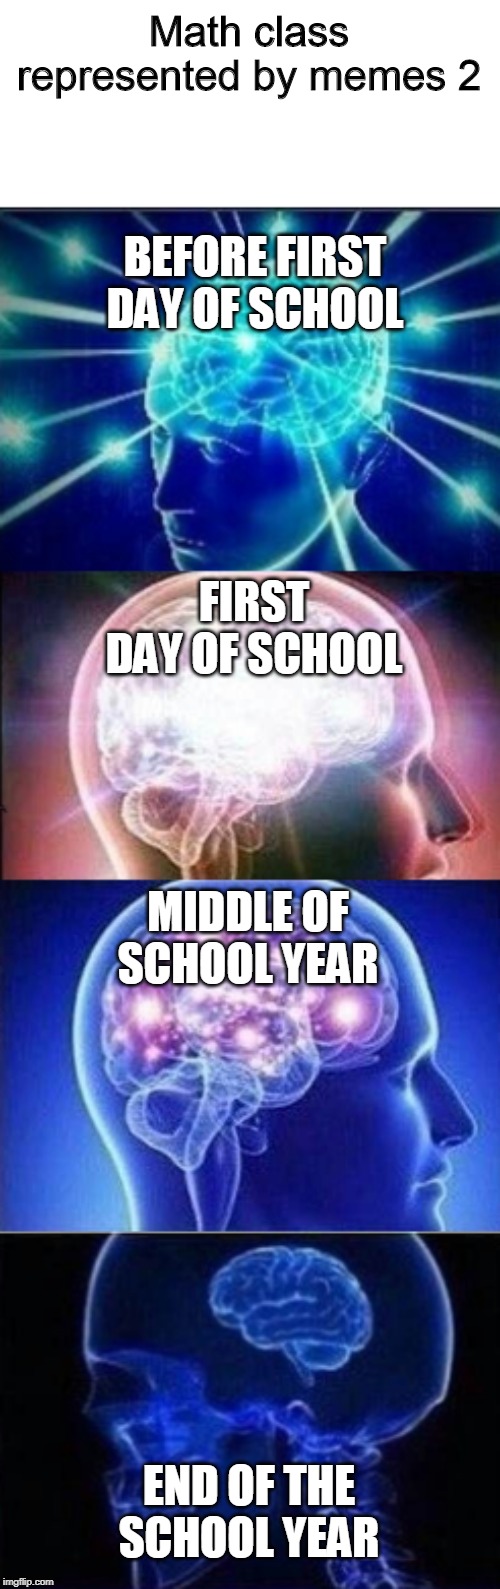 Math class represented by memes 2; BEFORE FIRST DAY OF SCHOOL; FIRST DAY OF SCHOOL; MIDDLE OF SCHOOL YEAR; END OF THE SCHOOL YEAR | image tagged in first day of school,school,expanding brain,memes | made w/ Imgflip meme maker